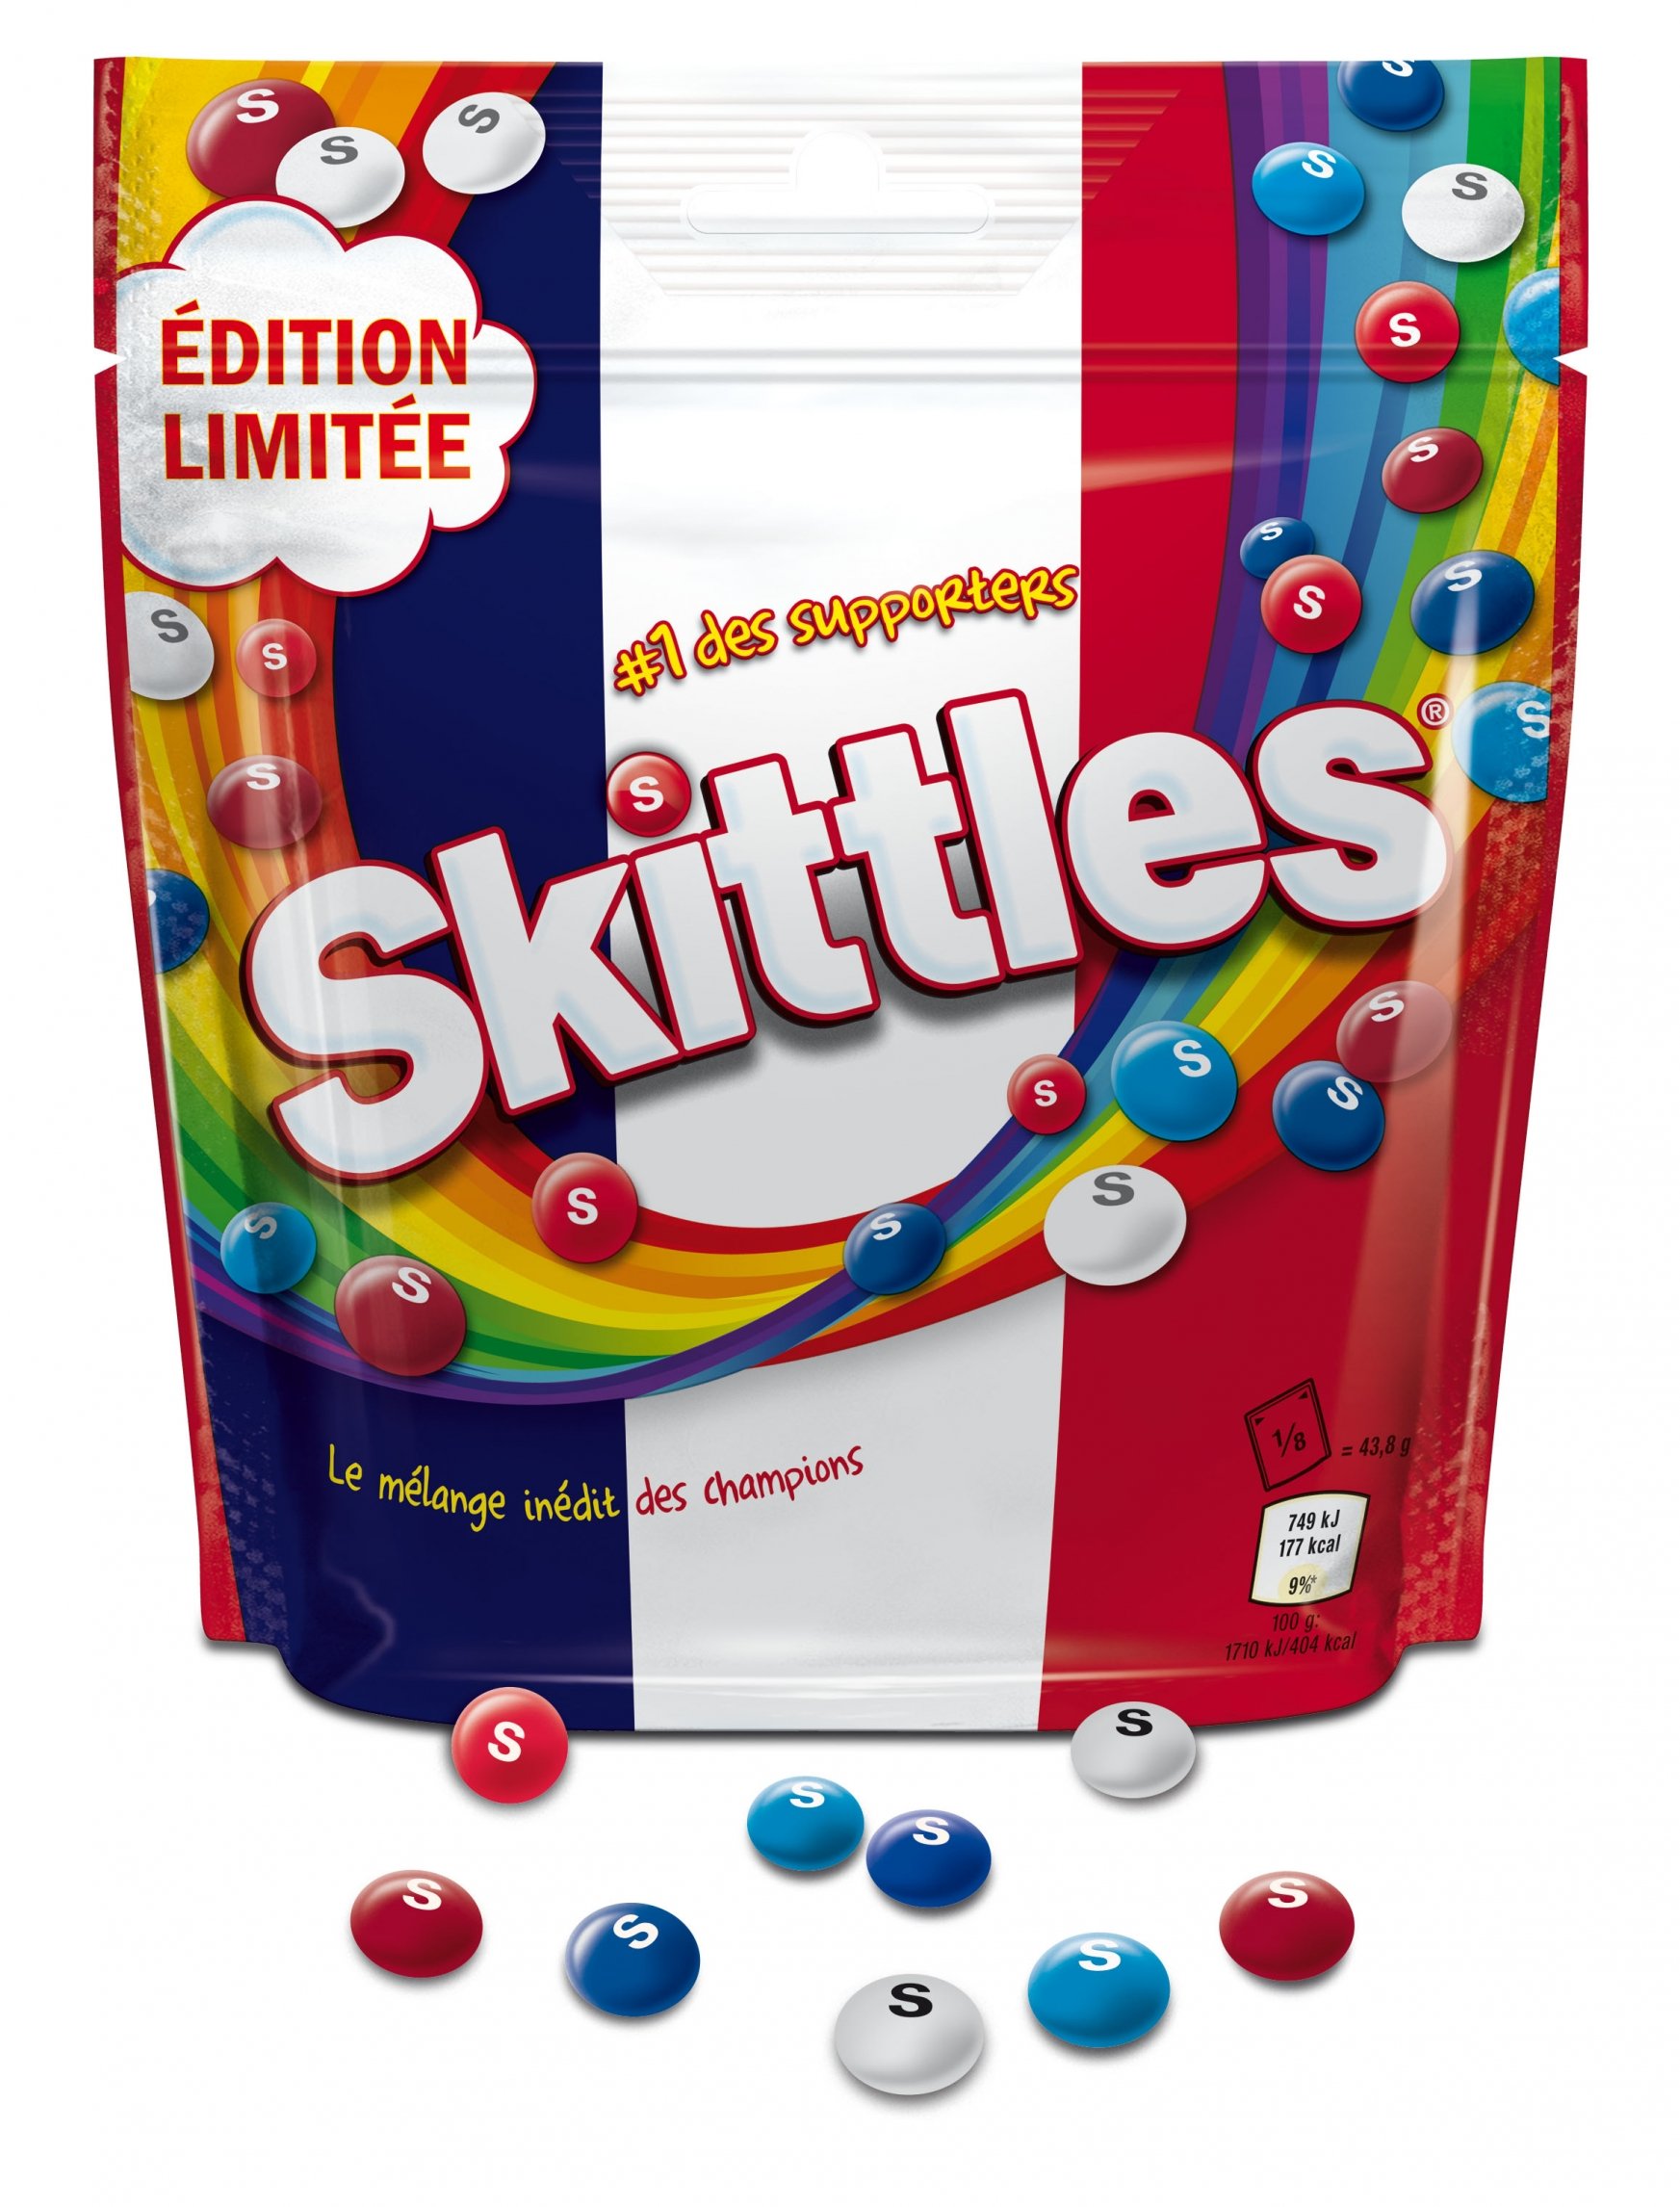 Skittles candy bag in limited edition for the World Cup